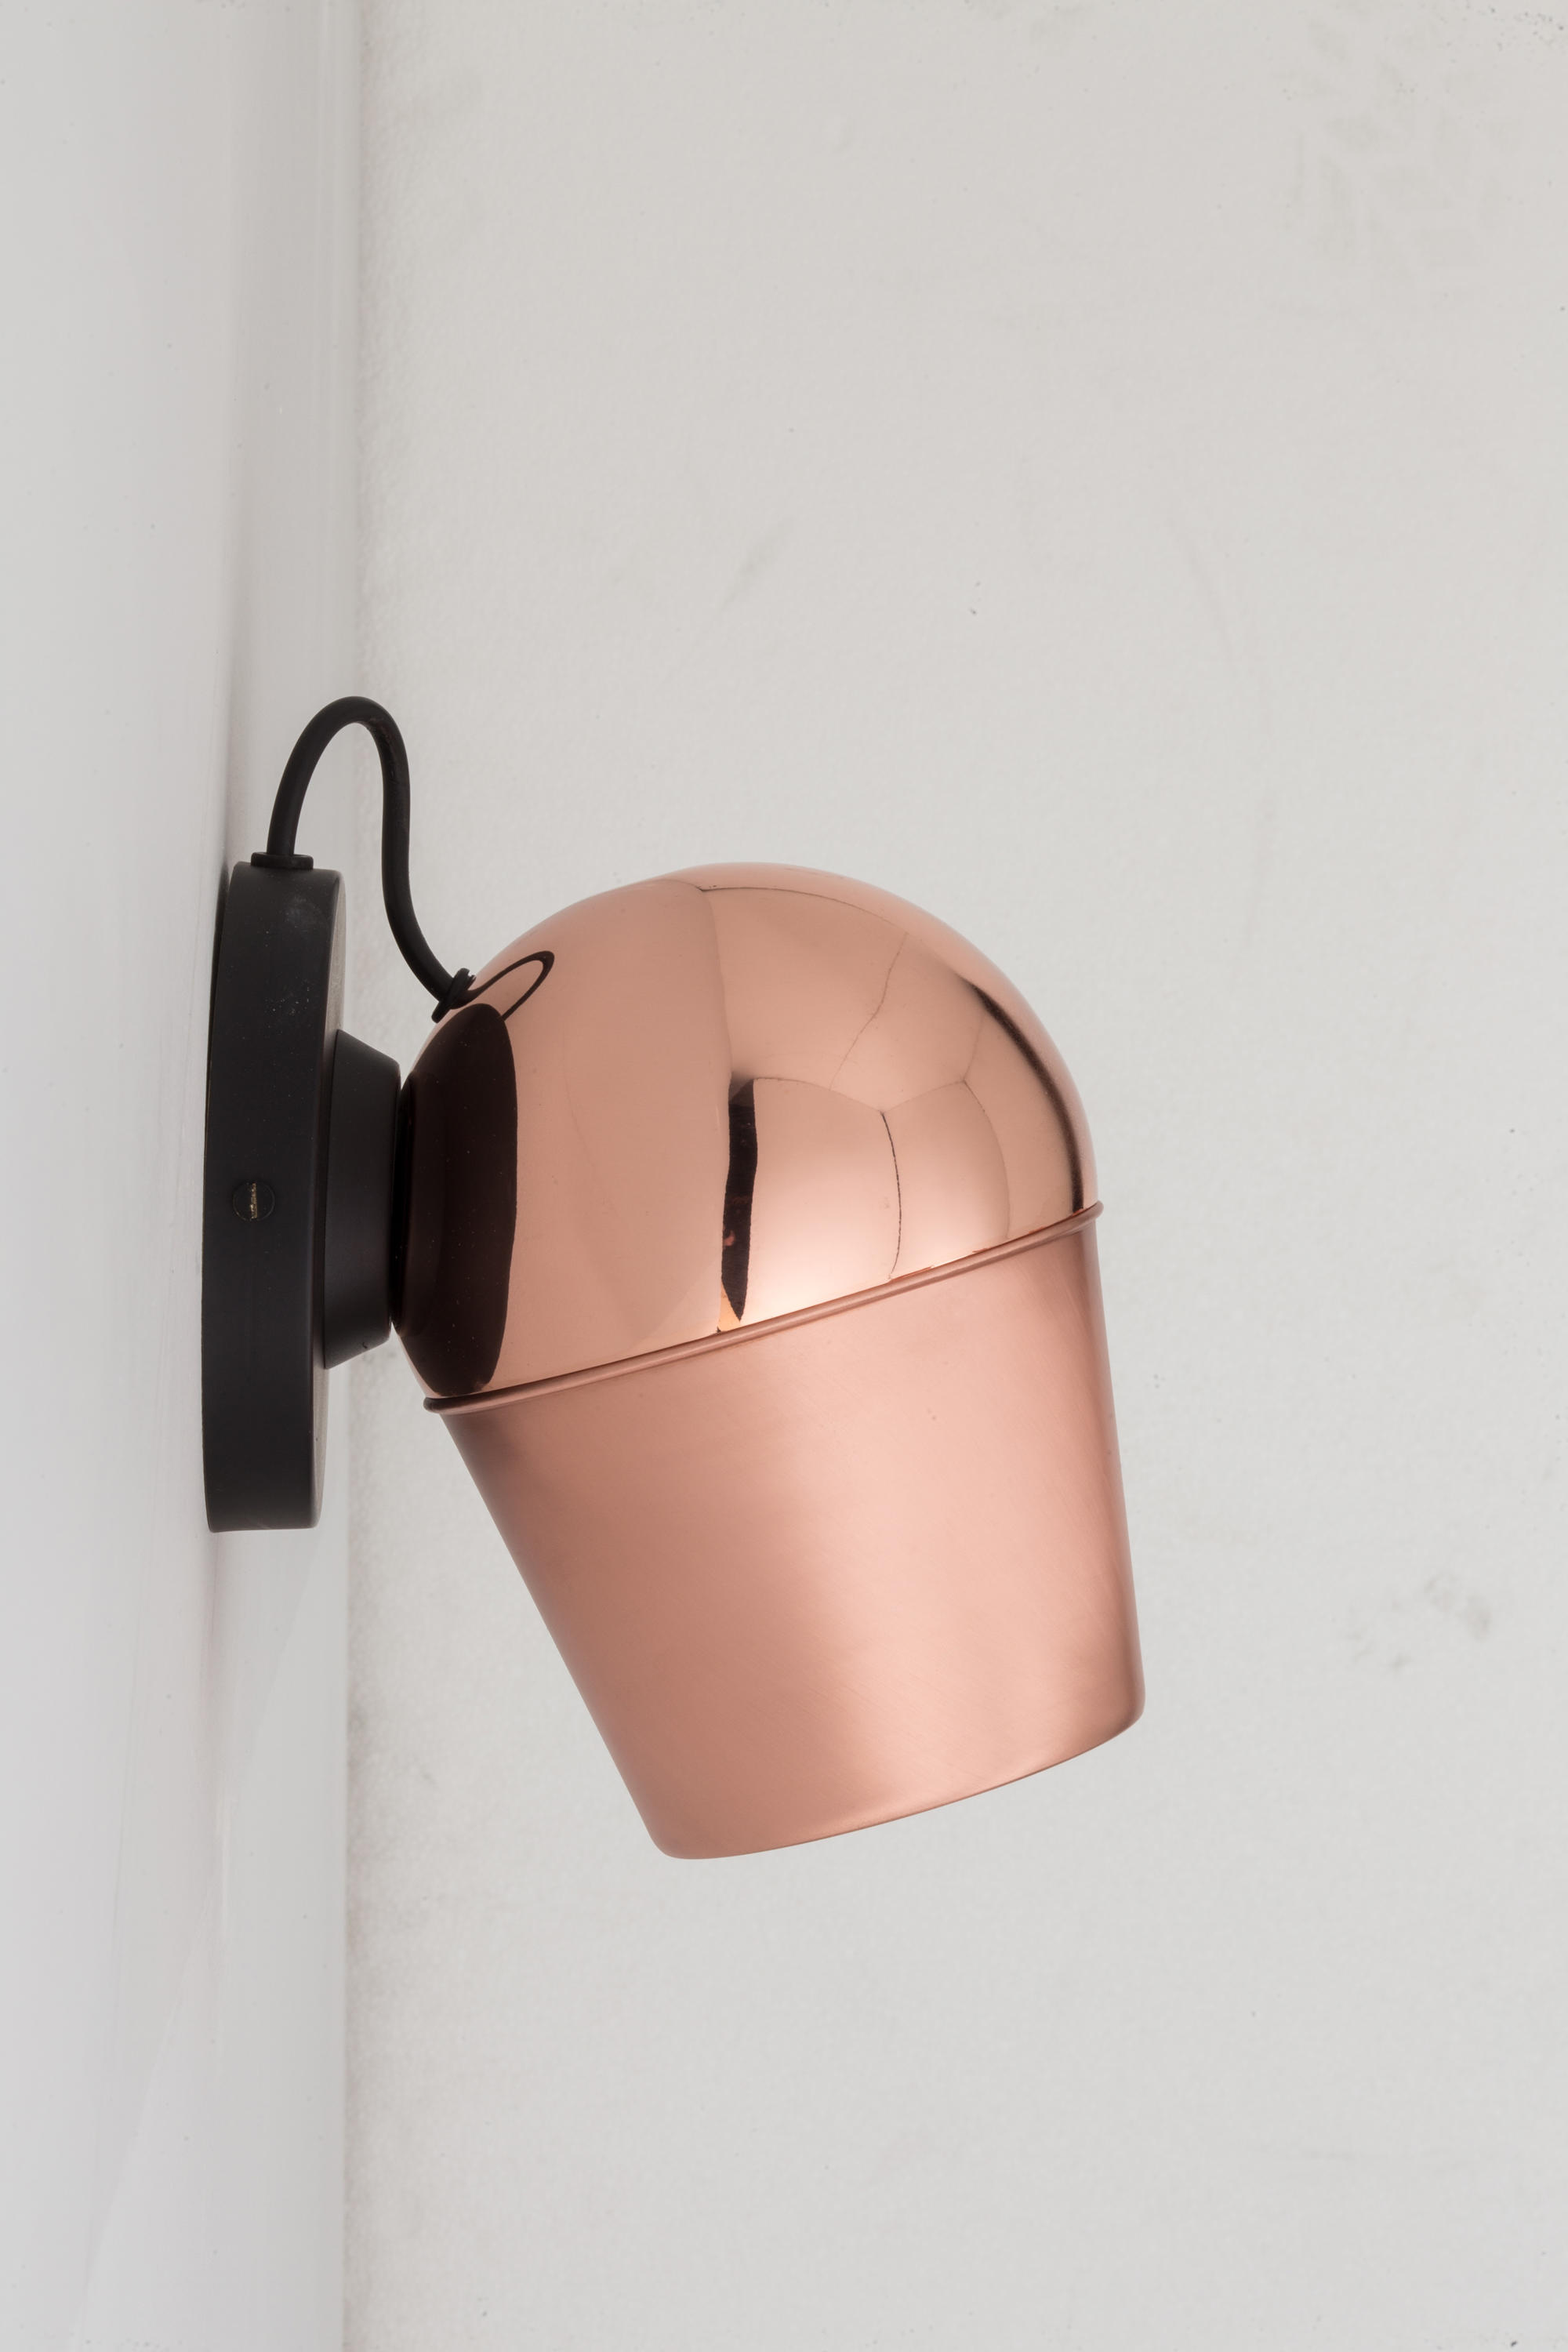 MAGNET - lights from Toscot | Architonic